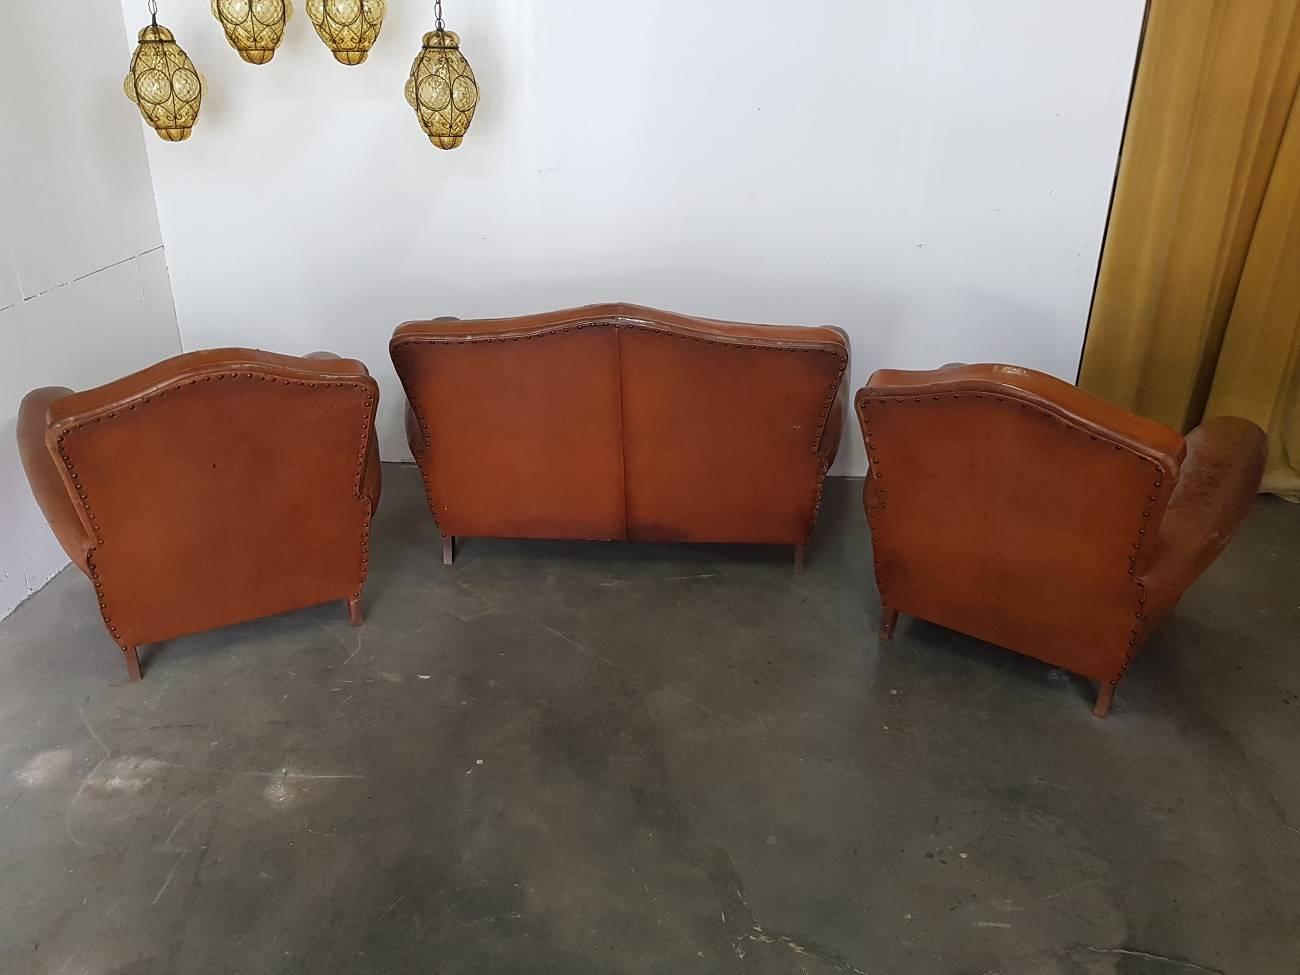 19th Century Vintage French Leather Club Chairs with Matching Sofa from the 1950s